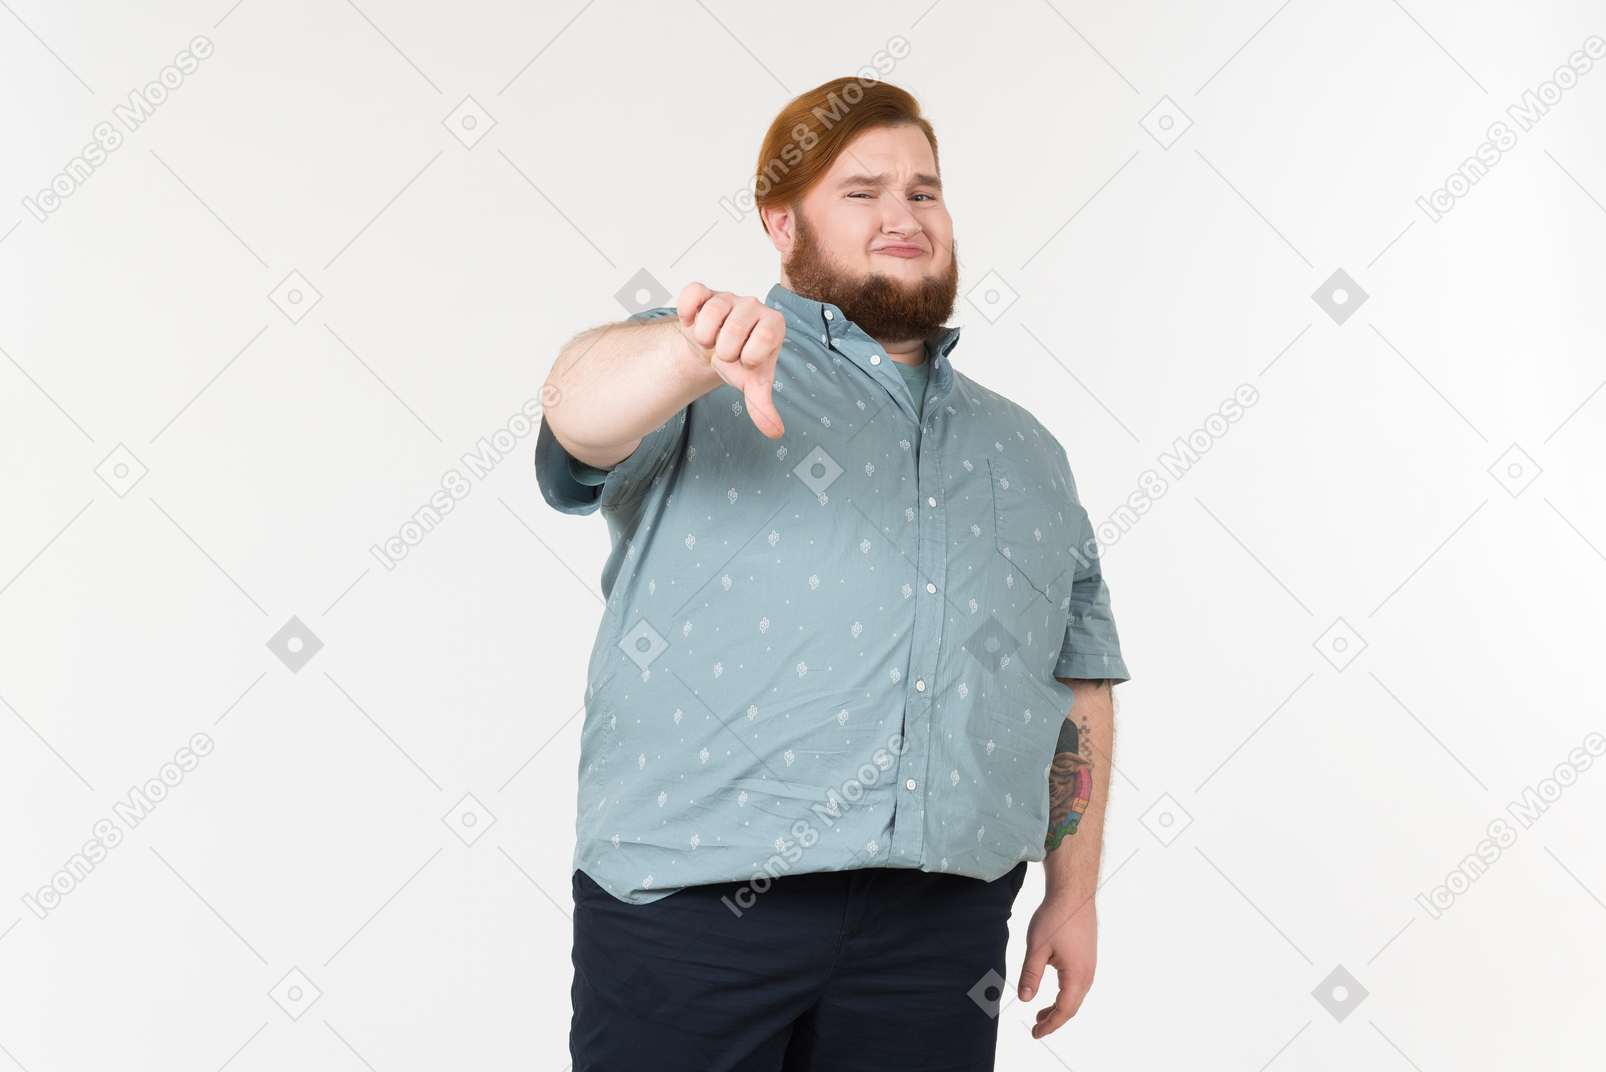 Dissatisfied young overweight man showing thumbs down